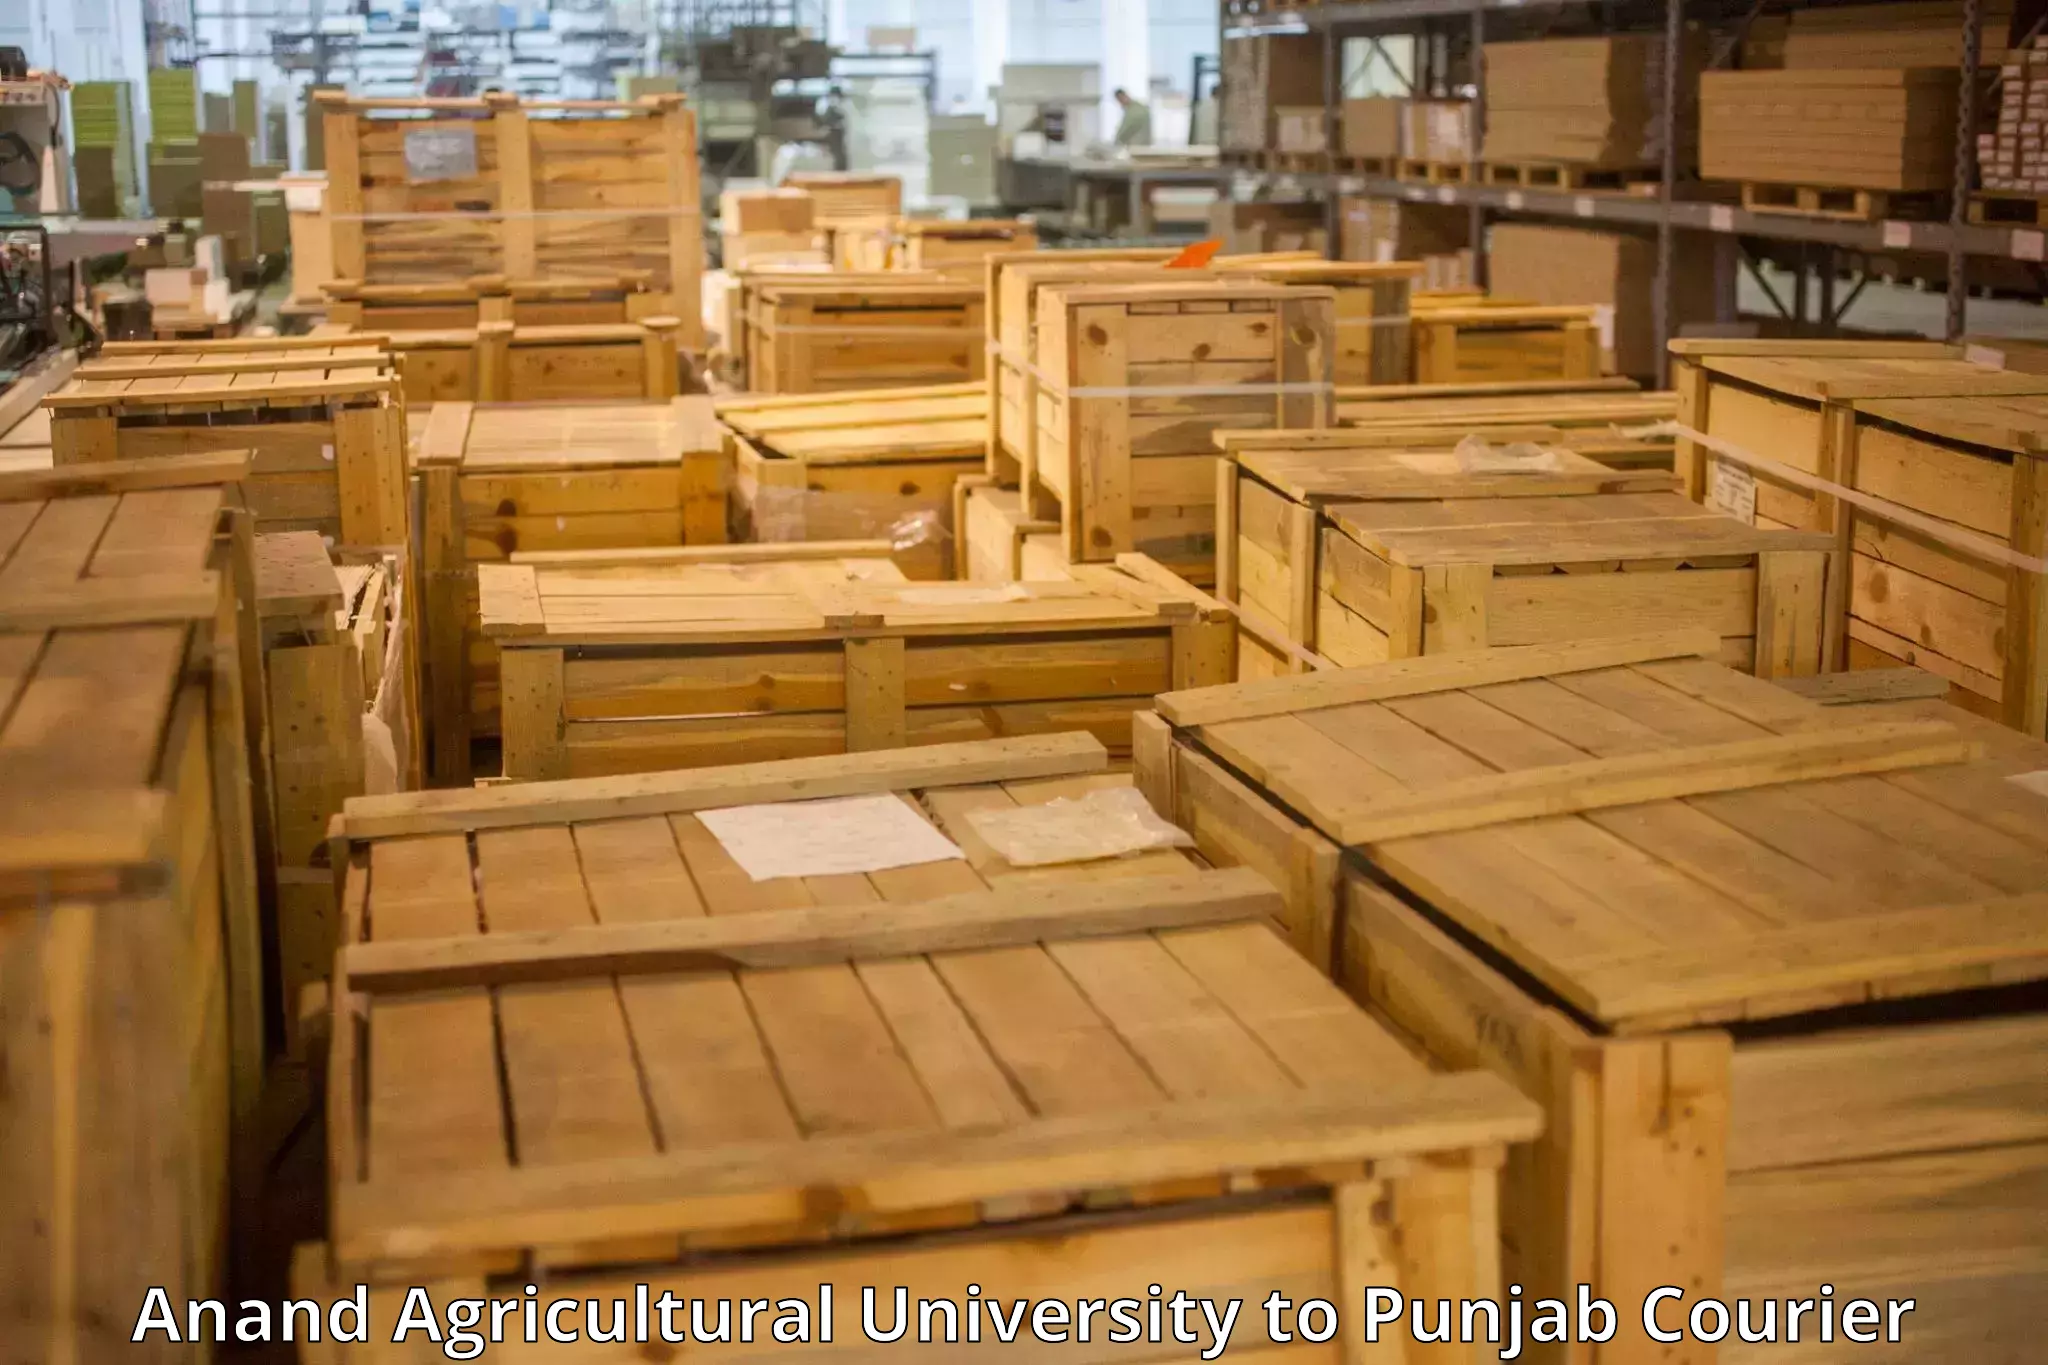 Quick luggage shipment Anand Agricultural University to Punjab